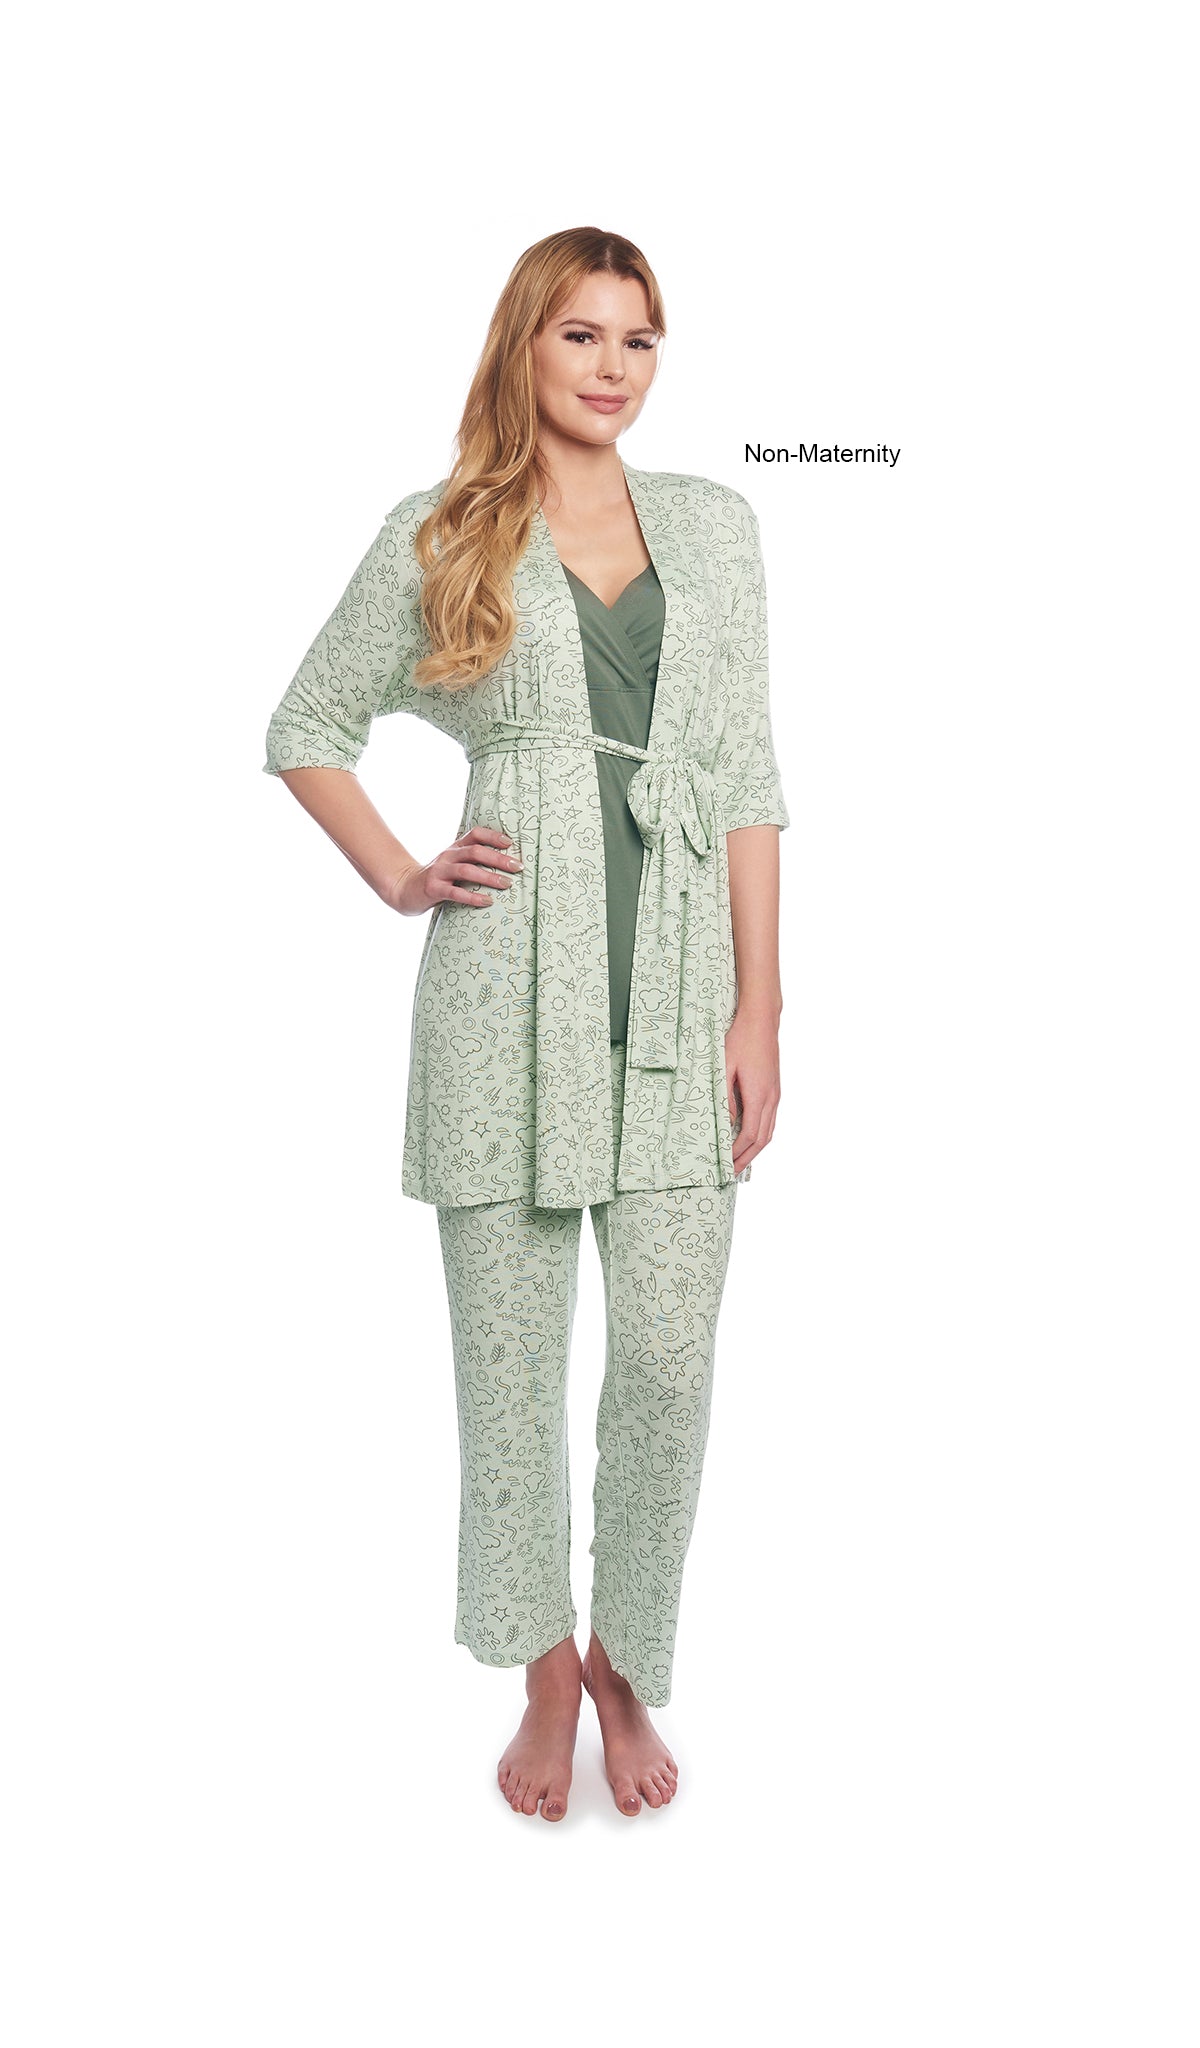 Sage Doodle Analise 3-Piece Set. Woman wearing 3/4 sleeve robe, tank top and pant as non-maternity with one hand on hip.